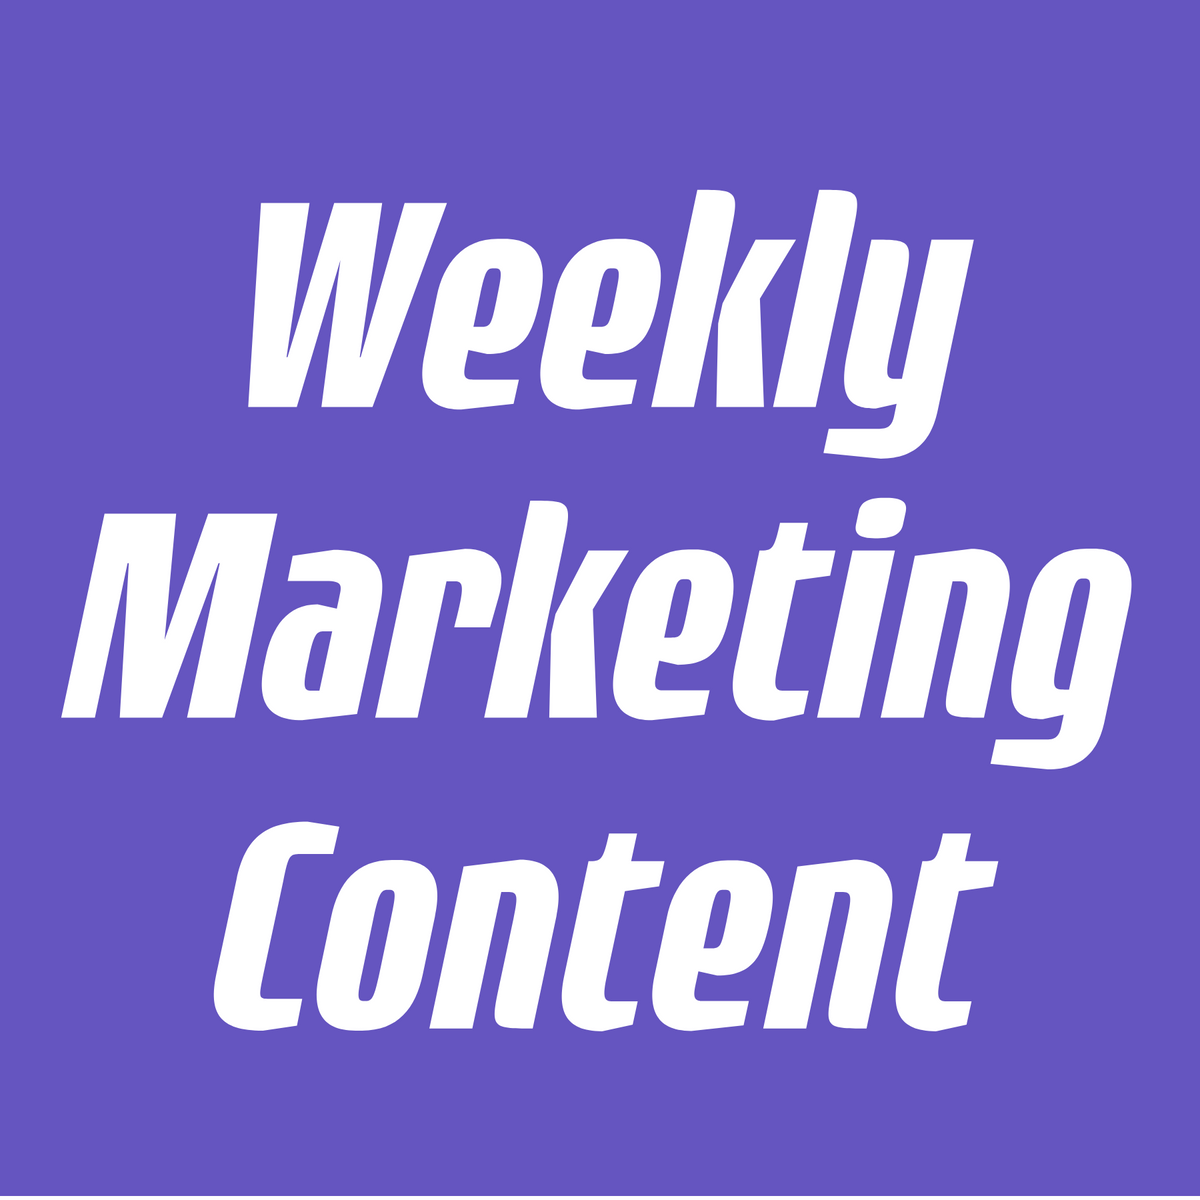 Weekly Marketing Content